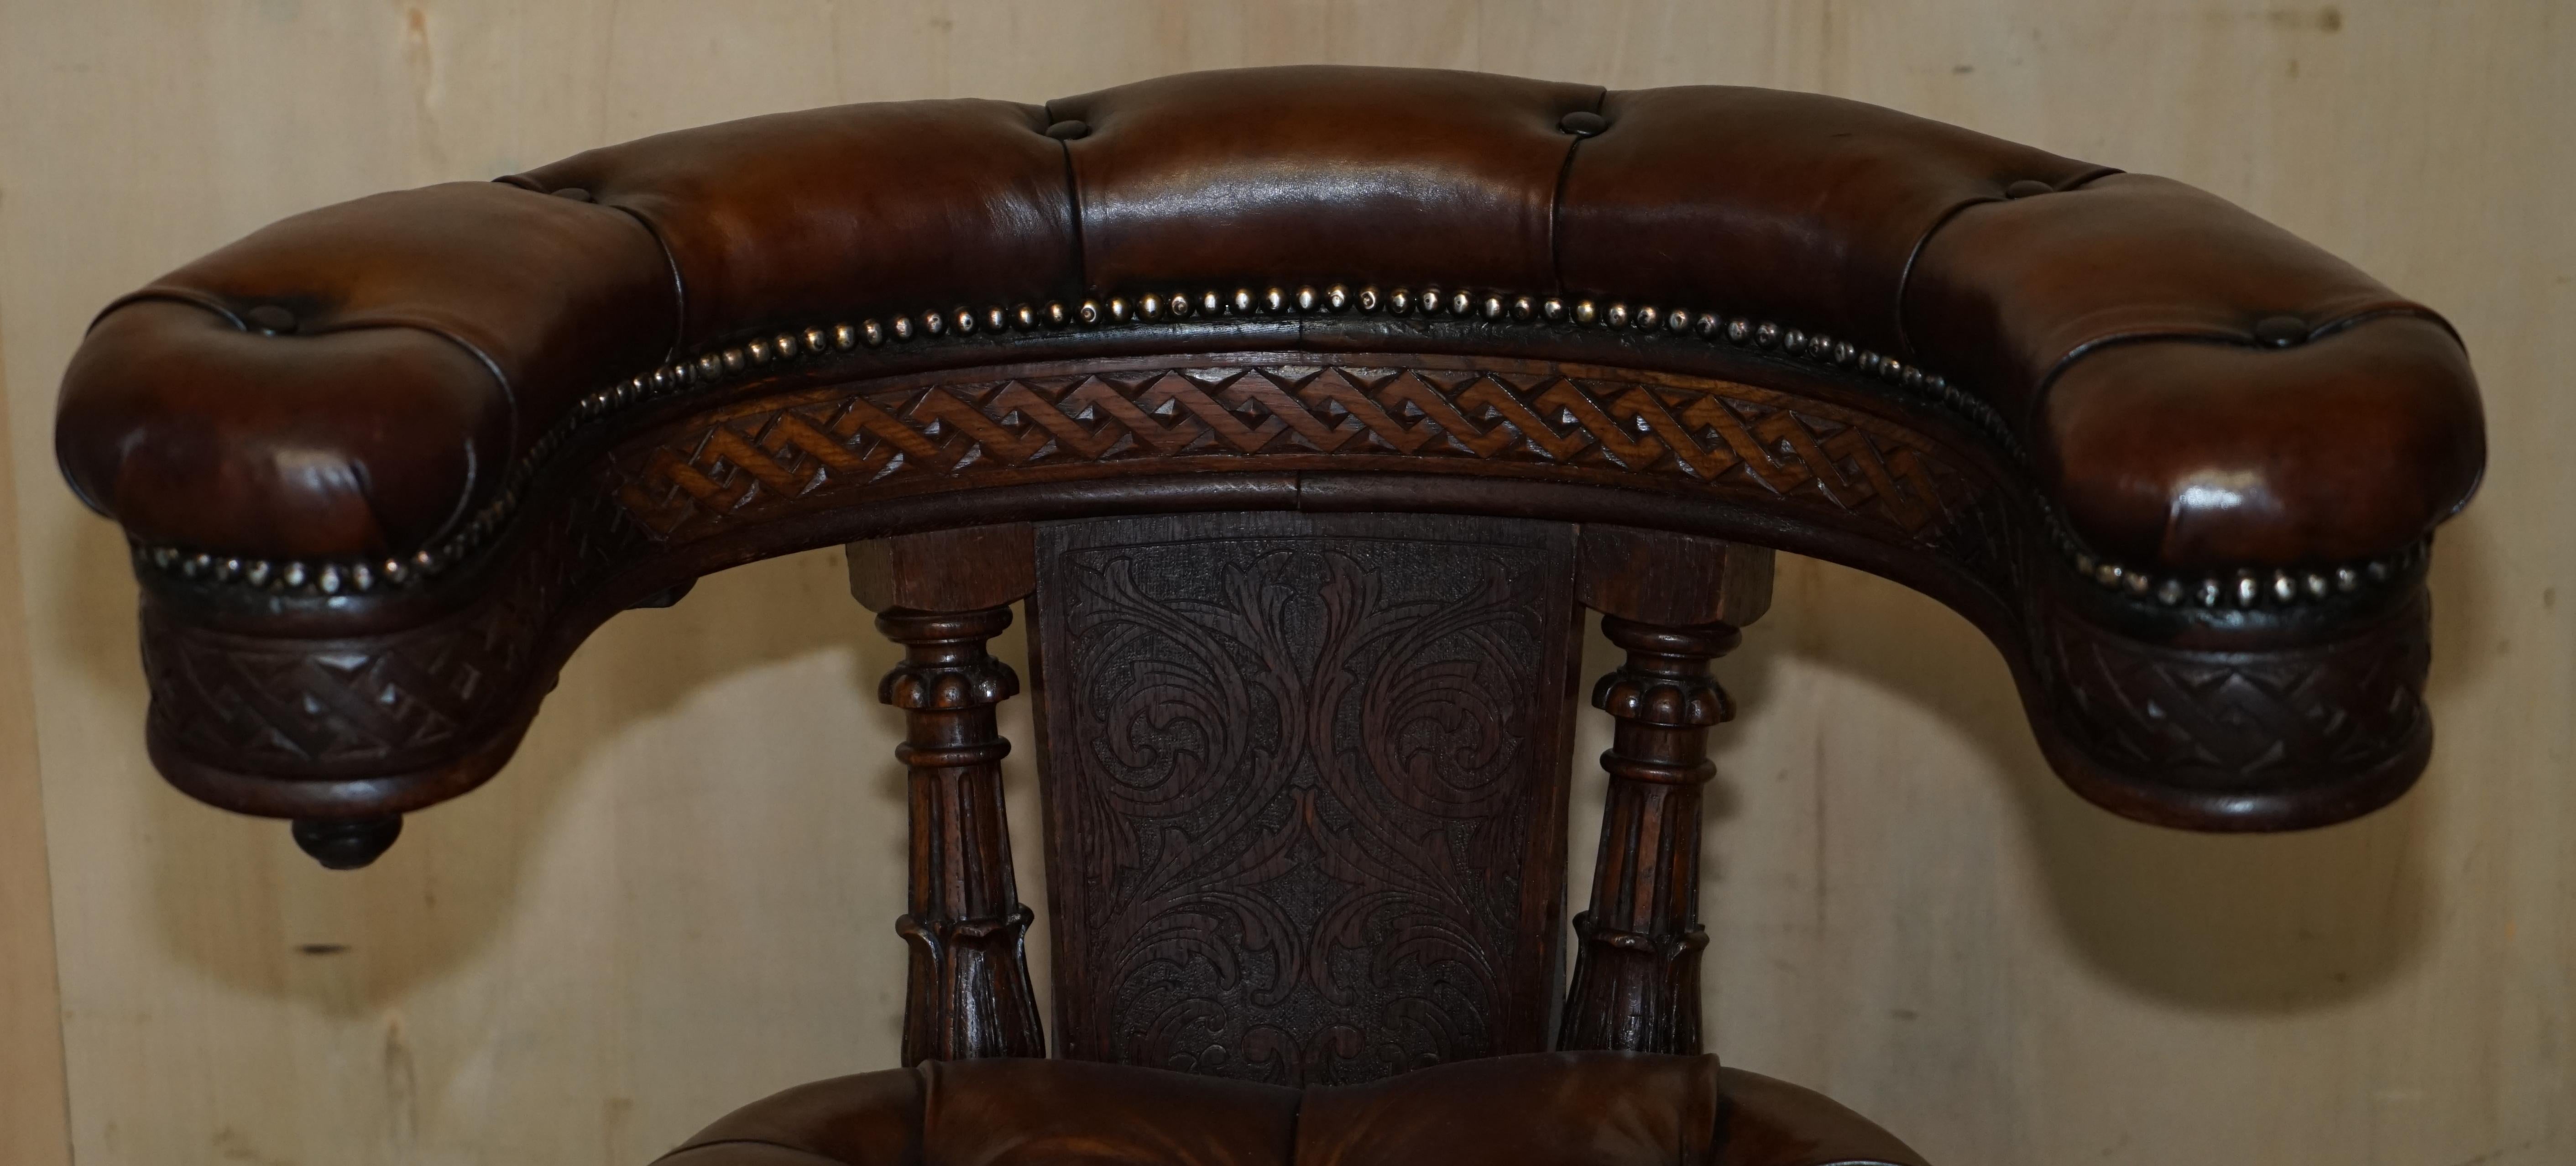 English Rare Important Antique 1830 Carved Cockfighting Chesterfield Brown Leather Chair